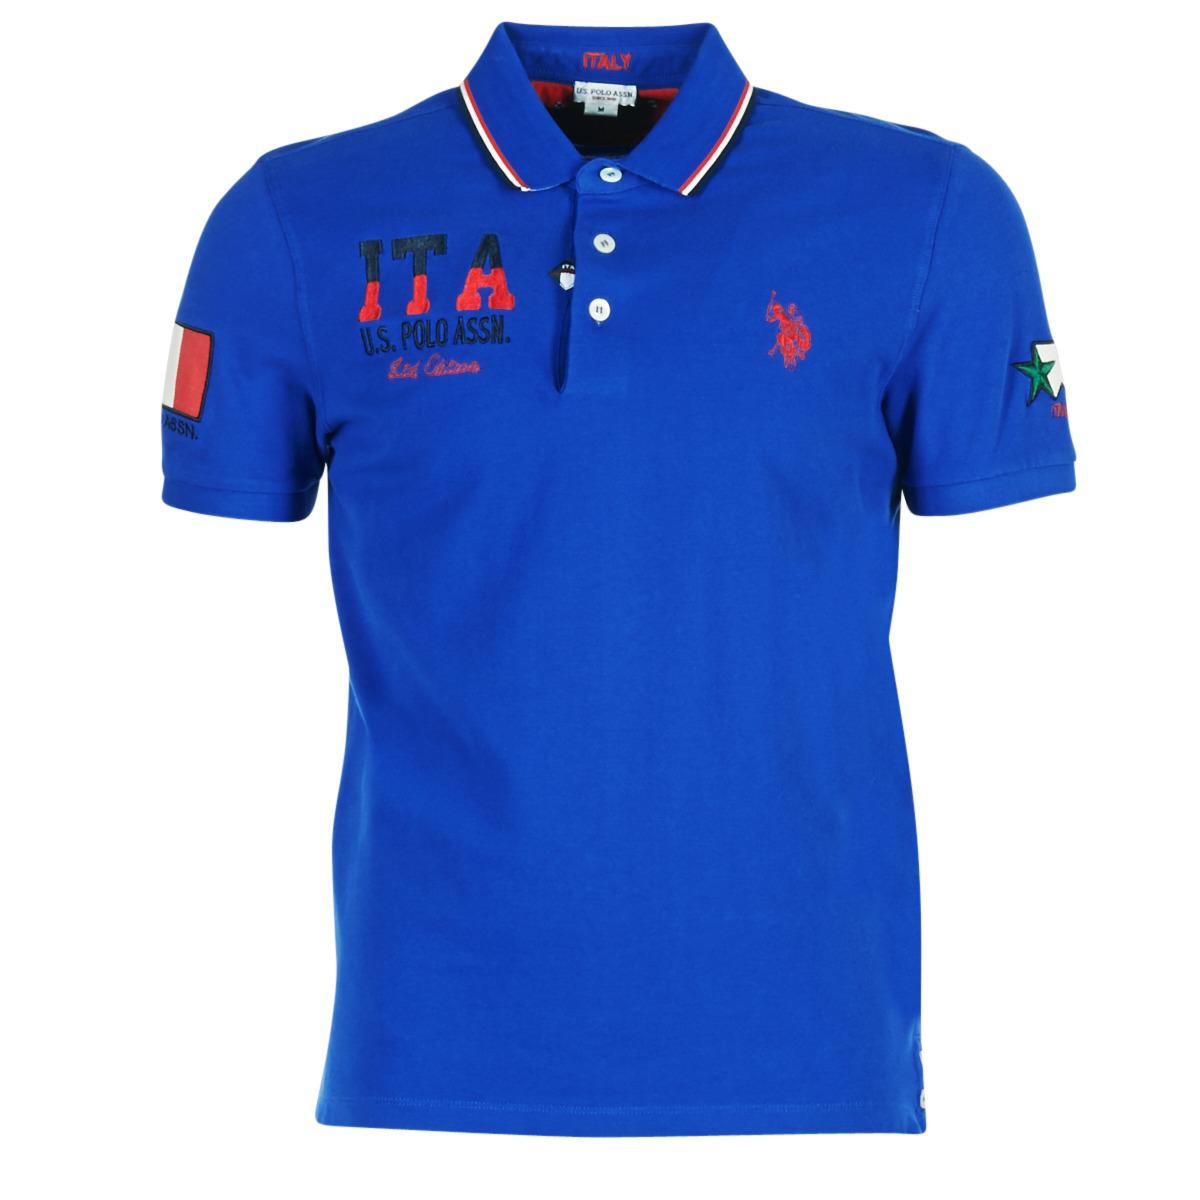 U.S. POLO ASSN. Italy Polo Shirt in Blue for Men - Lyst